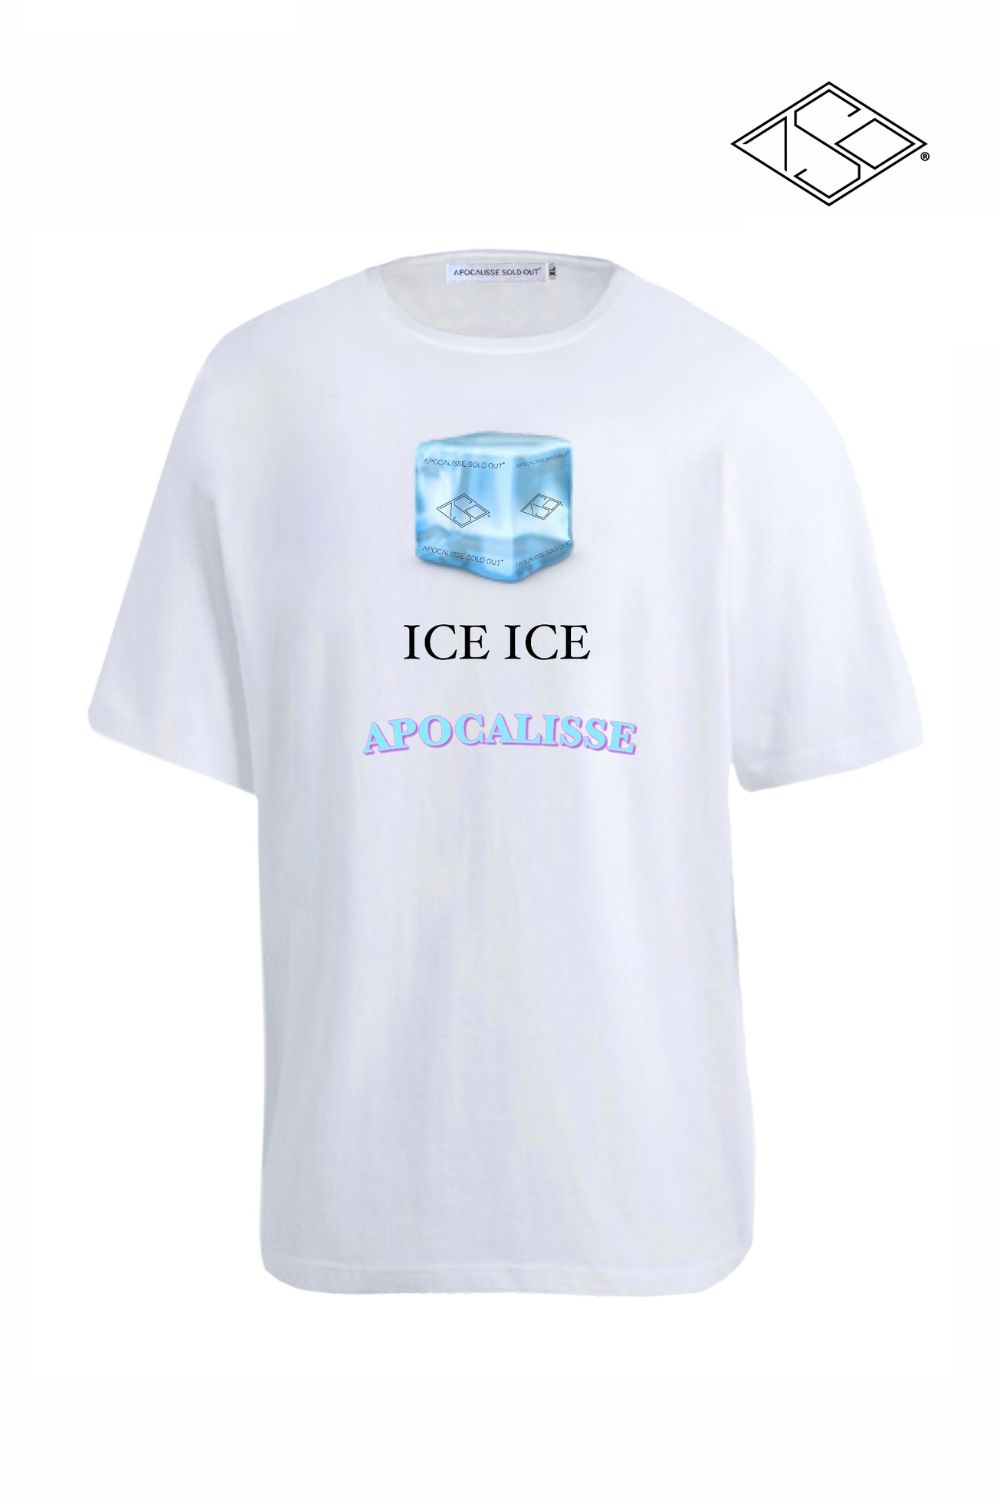 tshirt Apocalisse ICE ICE by ApocalisseSoldOut® Fashion Brand